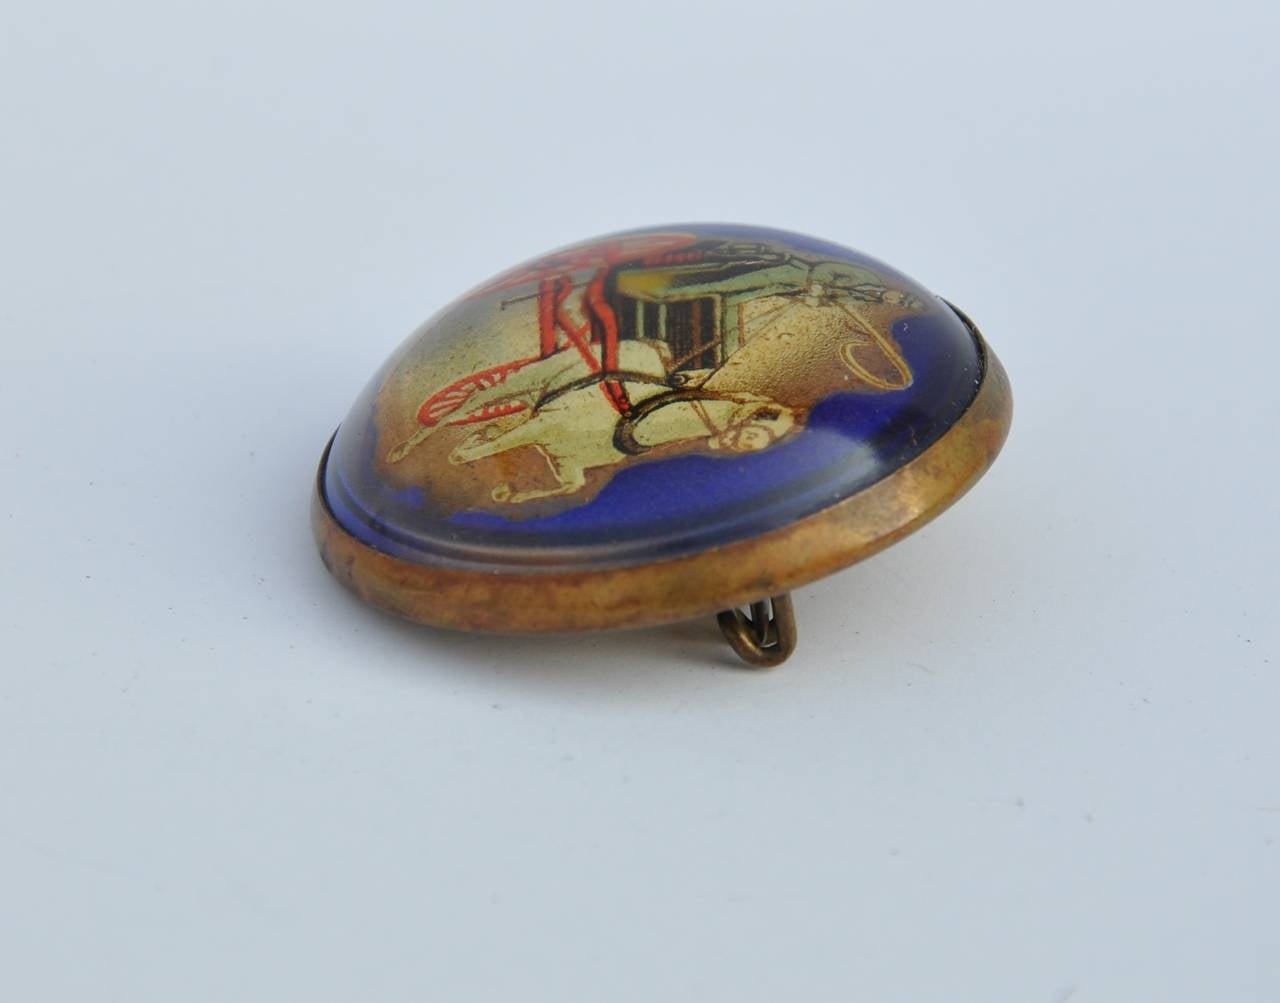       Wonderfully detailed brass-frame "Horse & Carriage" brooch measures 1 1/2" in circumference and 1/2" in depth.